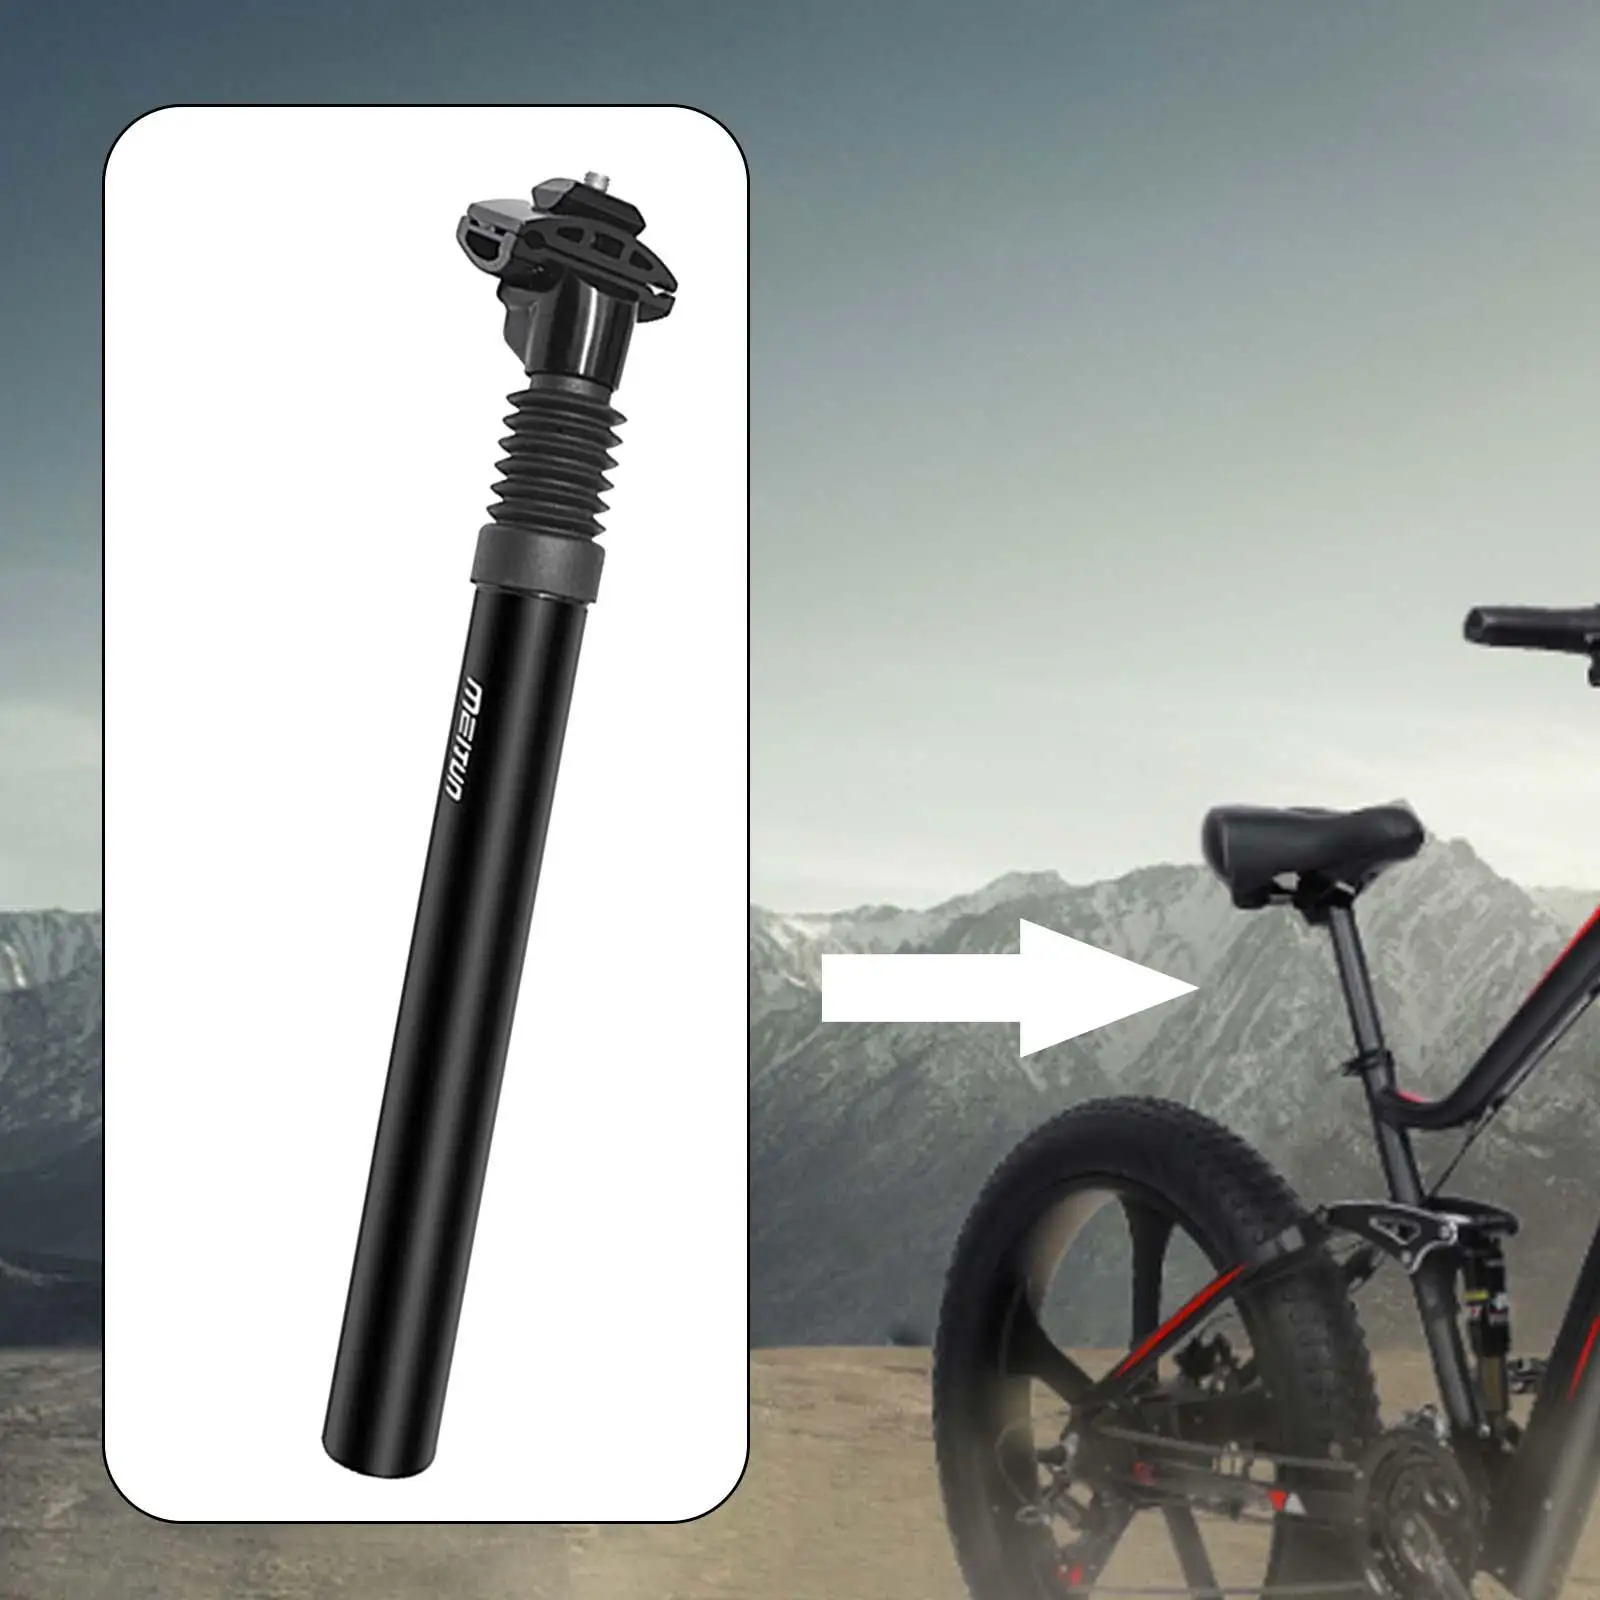 Bike Suspension Seatpost, Bicycle Seat Post, Shock Absorber, 350mm Damping Alloy Seat Tube Pole for Road Bikes, Universal